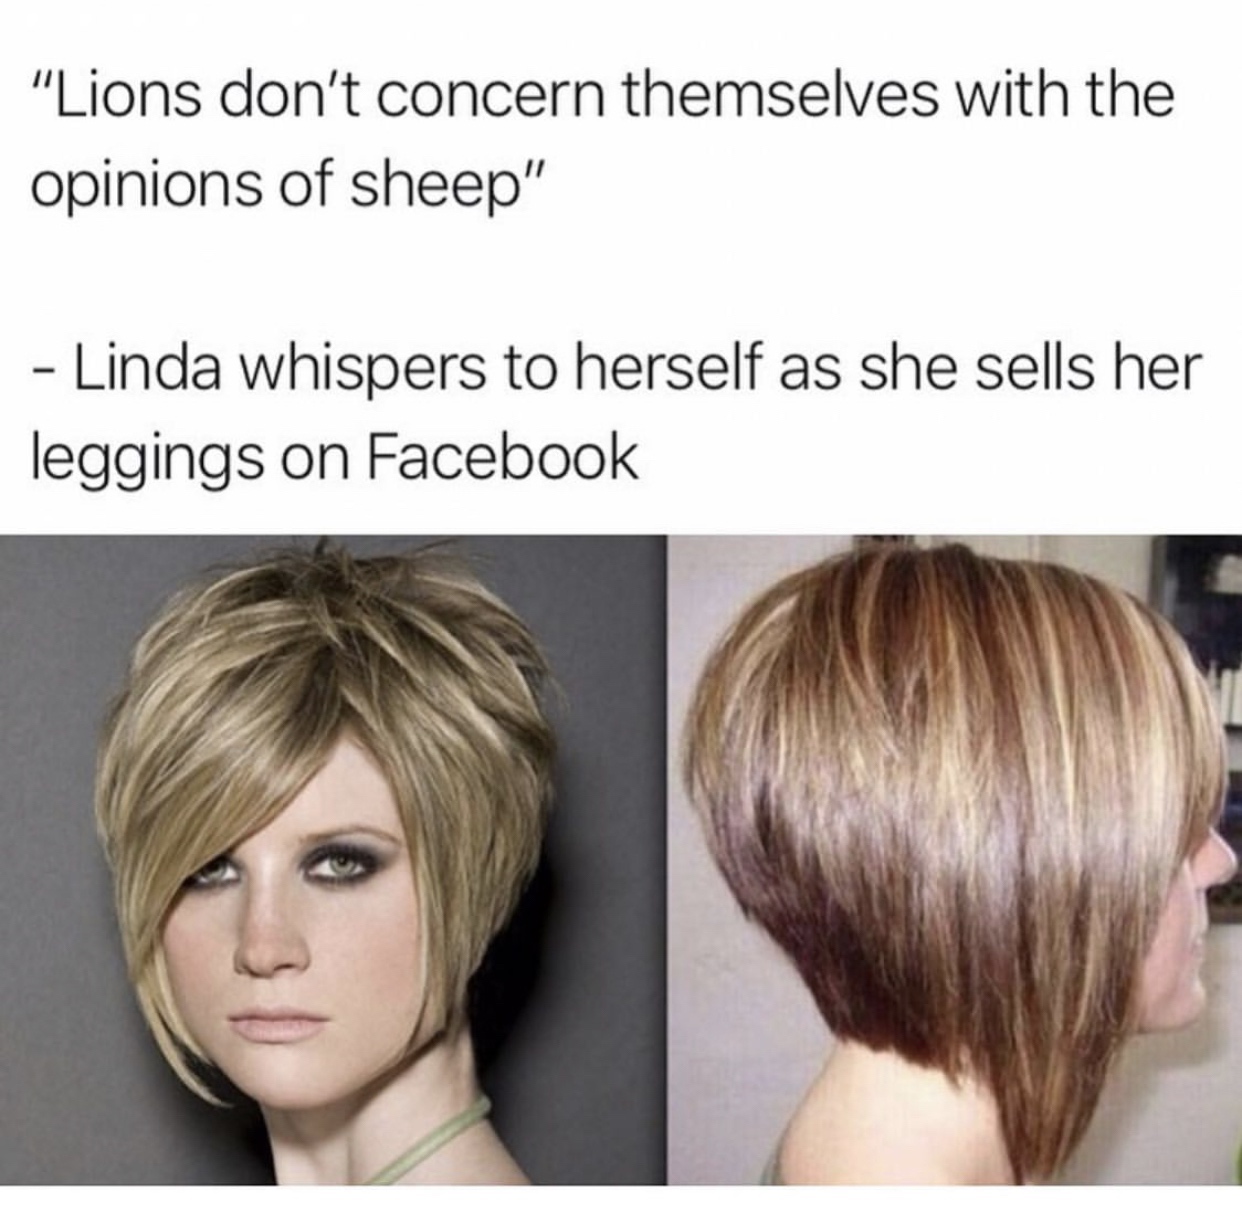 wanna speak to the manager - "Lions don't concern themselves with the opinions of sheep" Linda whispers to herself as she sells her leggings on Facebook